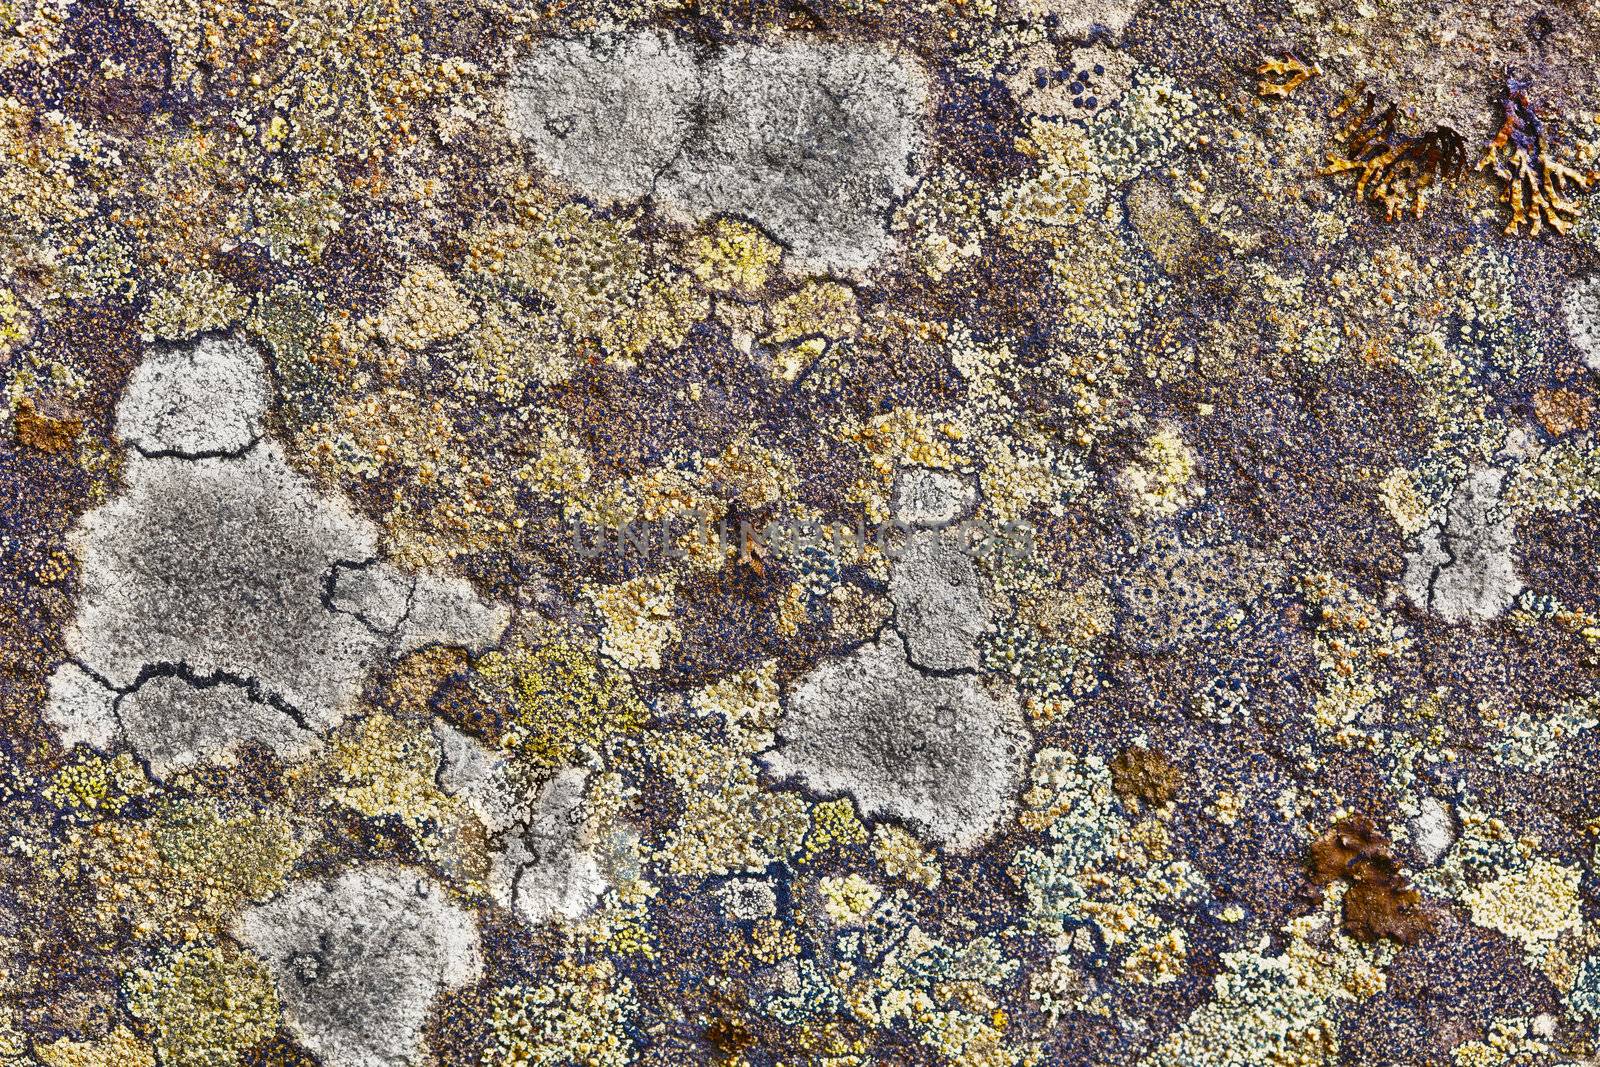 Granite rocks covered with lichen by pzaxe